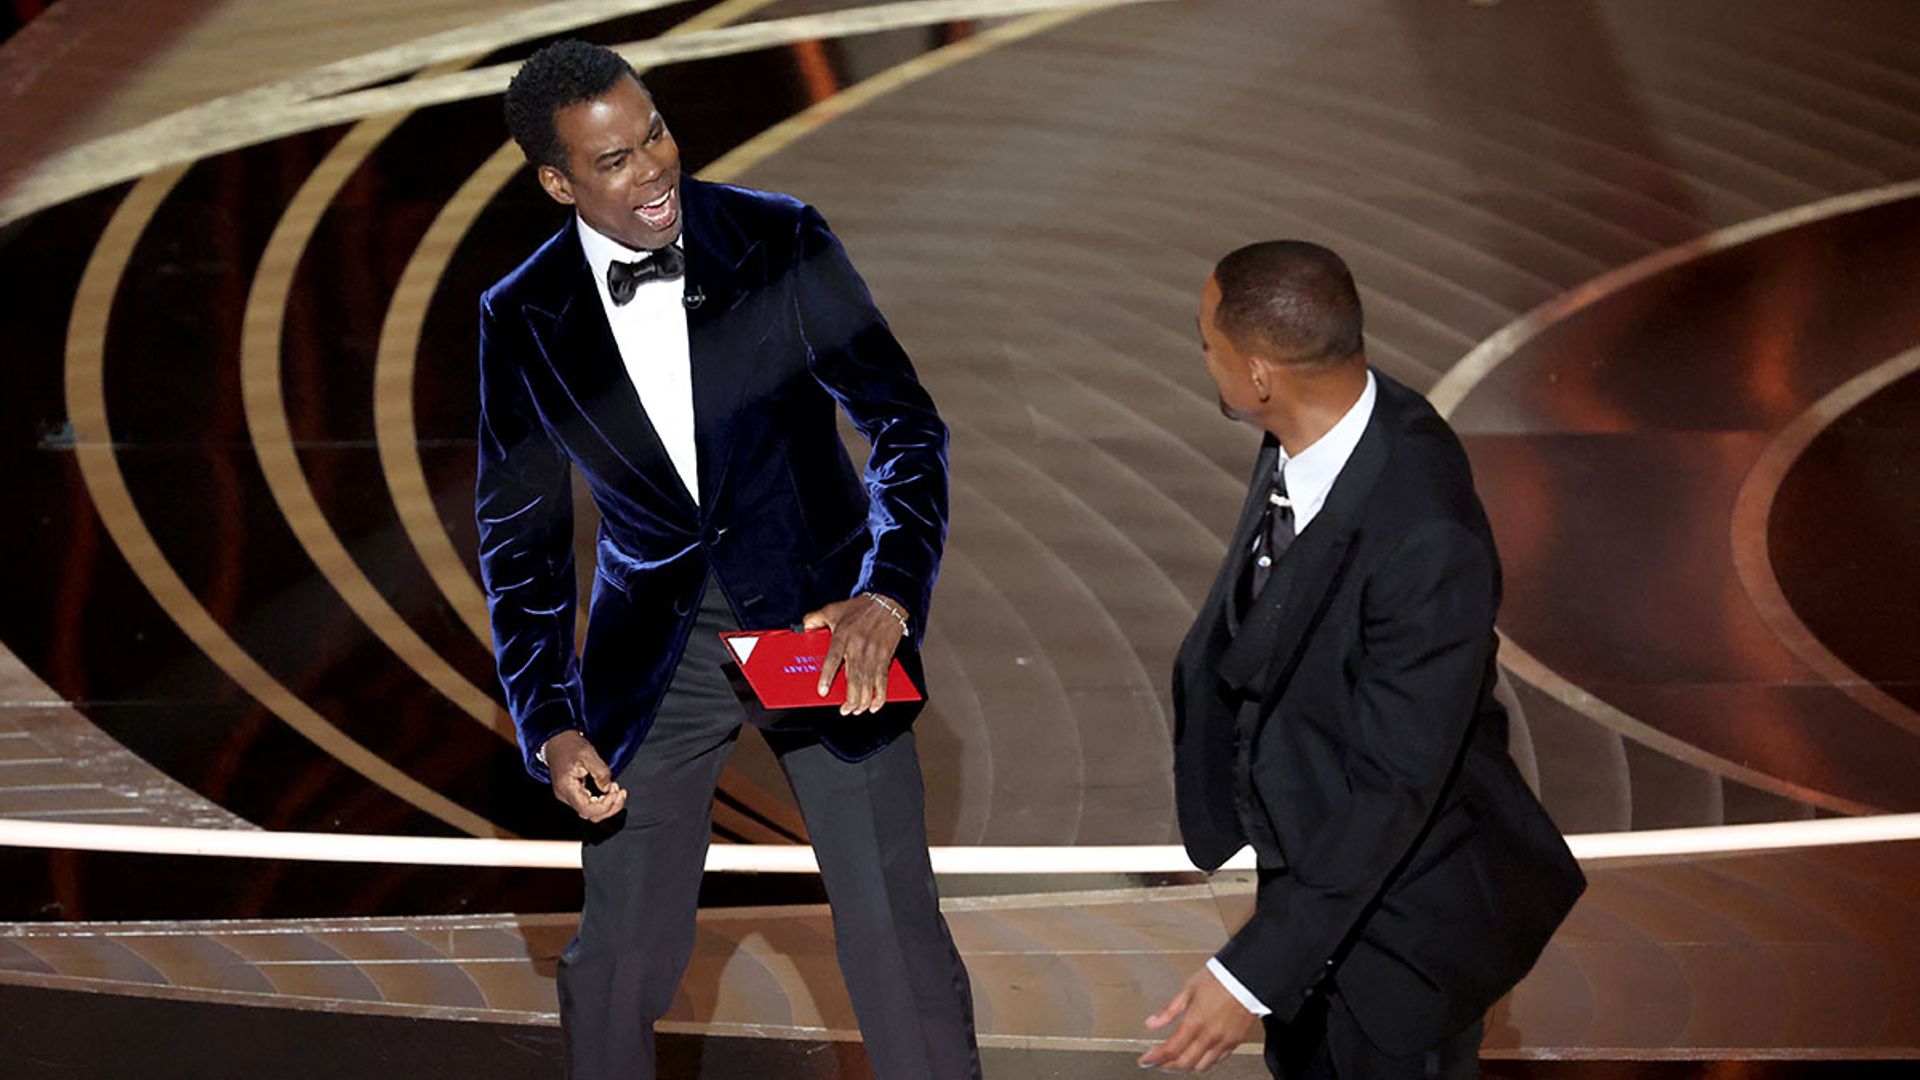 Will Smith's fans convinced attack on Chris Rock was 'staged' after actor predicted 'chaos' hours earlier